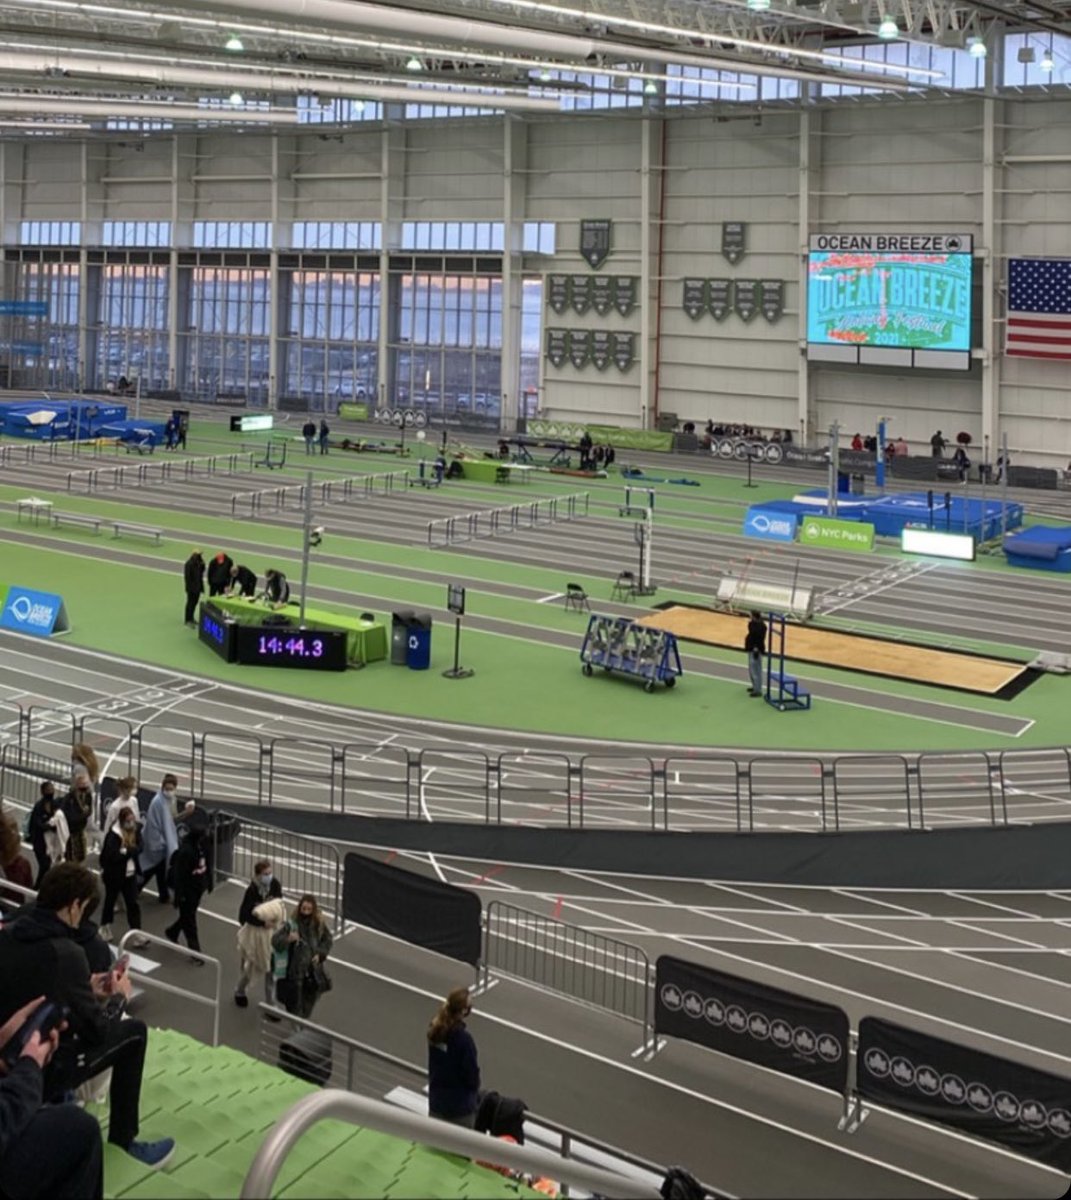 Good luck to our Boys and Girls Indoor Track team as they compete at the Ocean Breeze Invitational today! @DelMilAcadTF